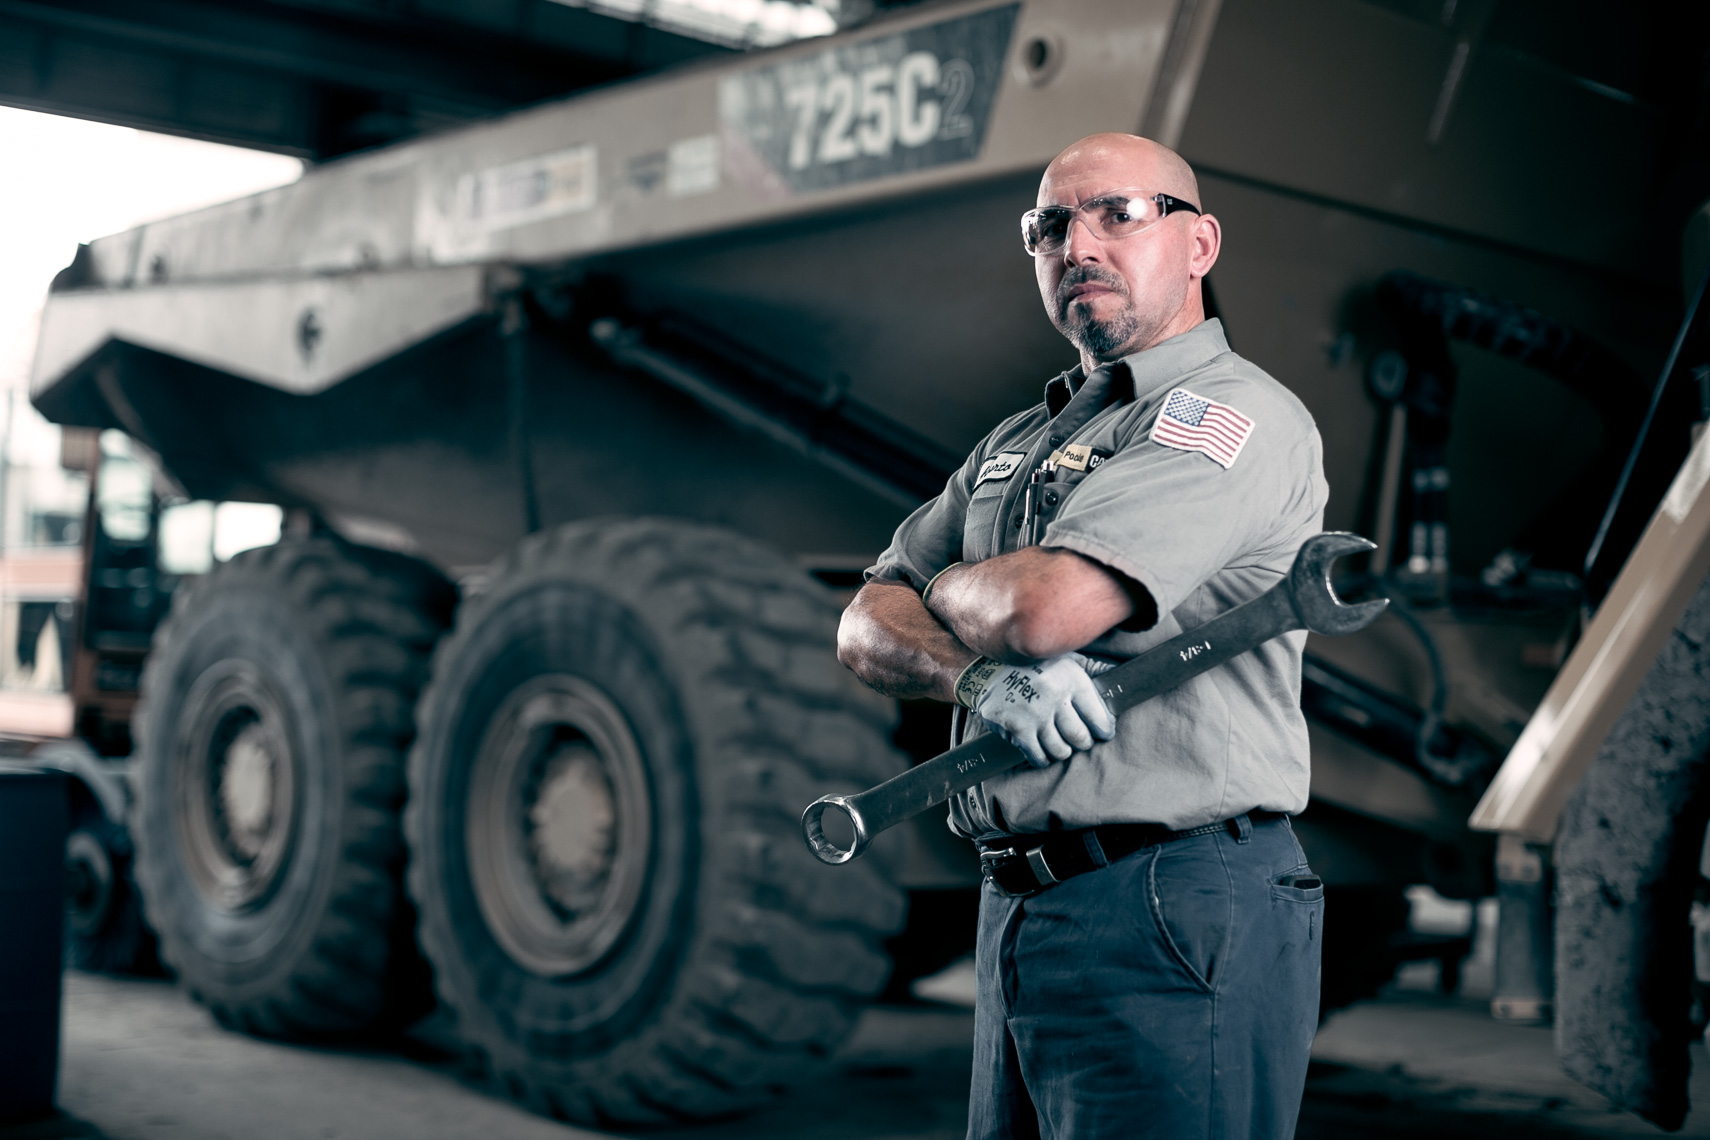 Service_Technicians_for_Gregory_Poole_20190904_photo_by_Justin_Kase_Conder_3057-Edit_CAT.JPG